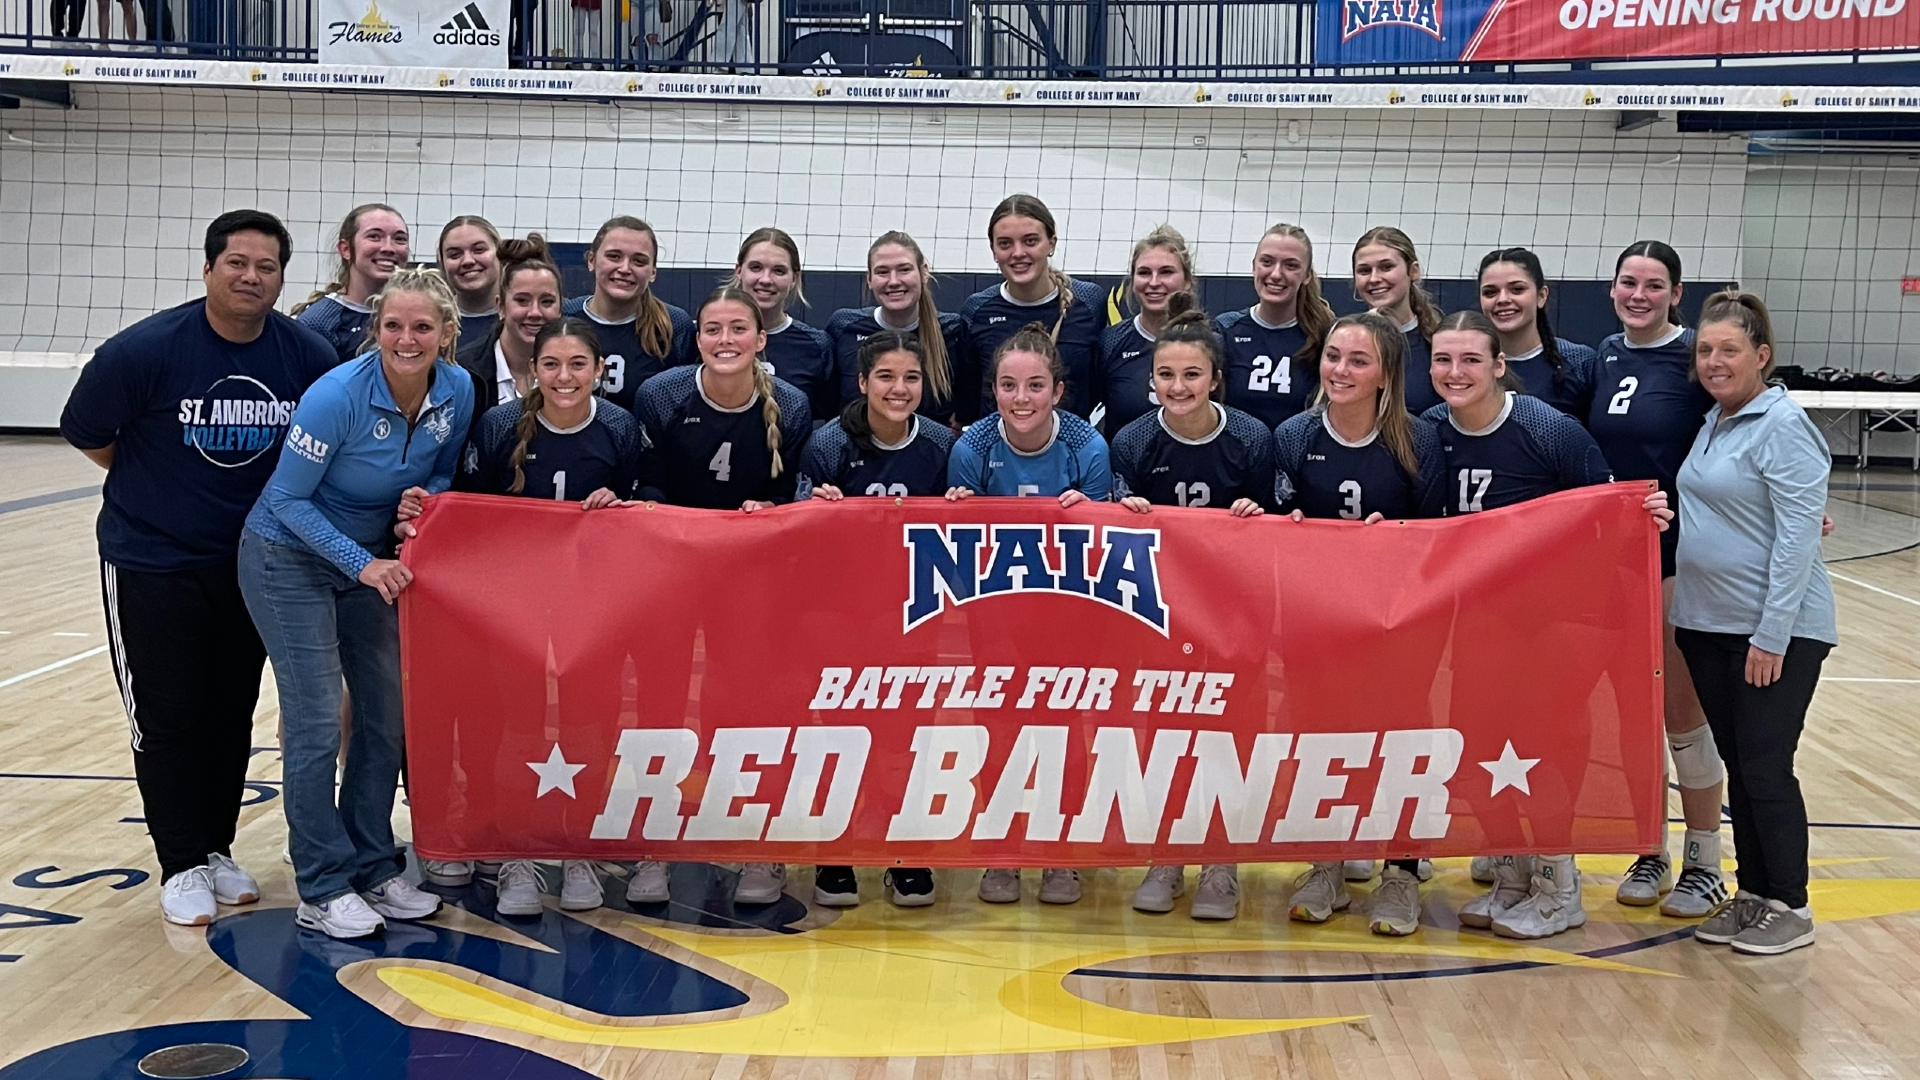 St. Ambrose defeats No. 16 Saint Mary in NAIA Tournament opening round